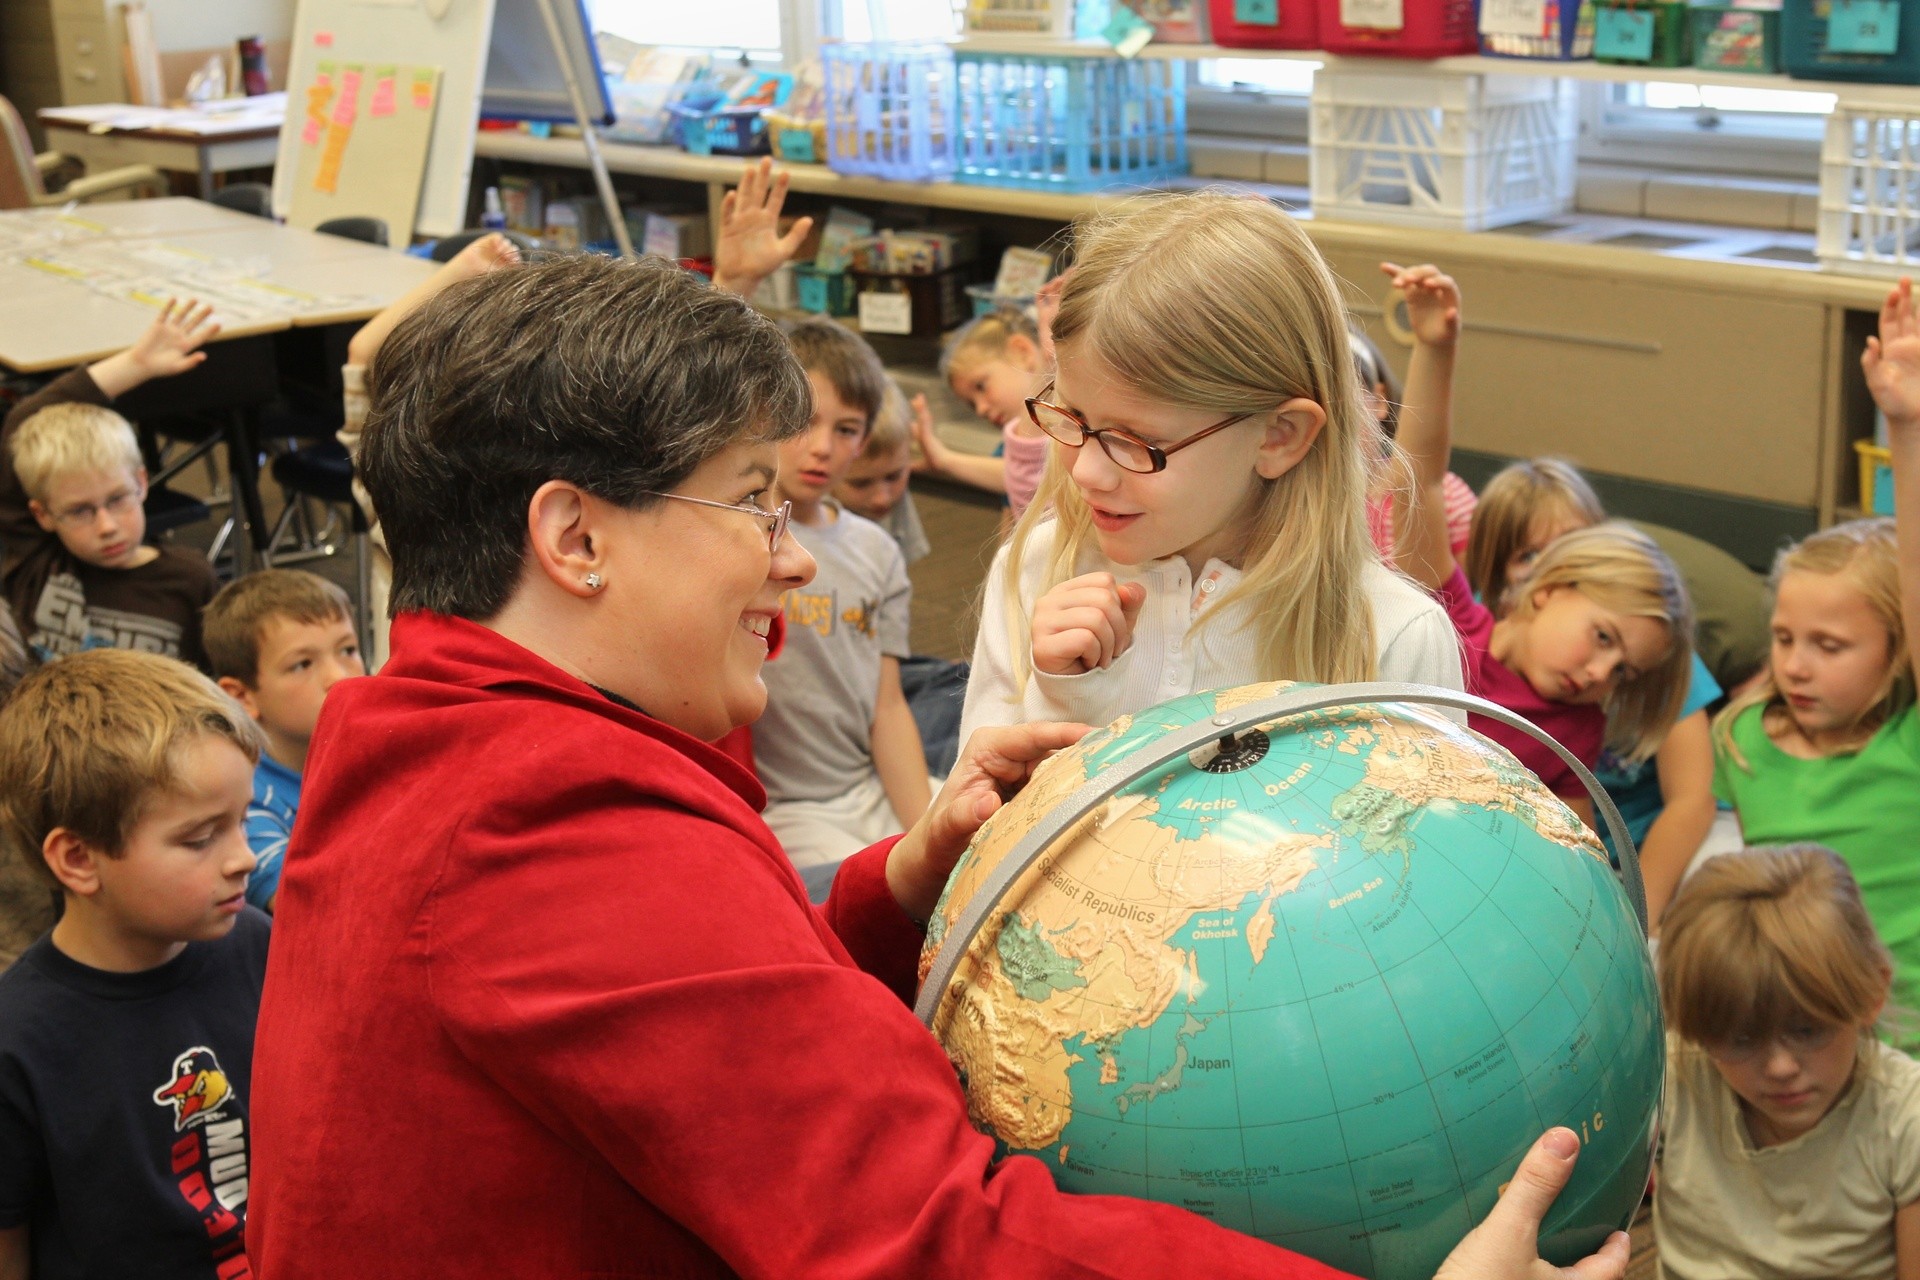 A female world language teacher points out a country on a globe to a little girl as the rest of the class sits on the floor around them.